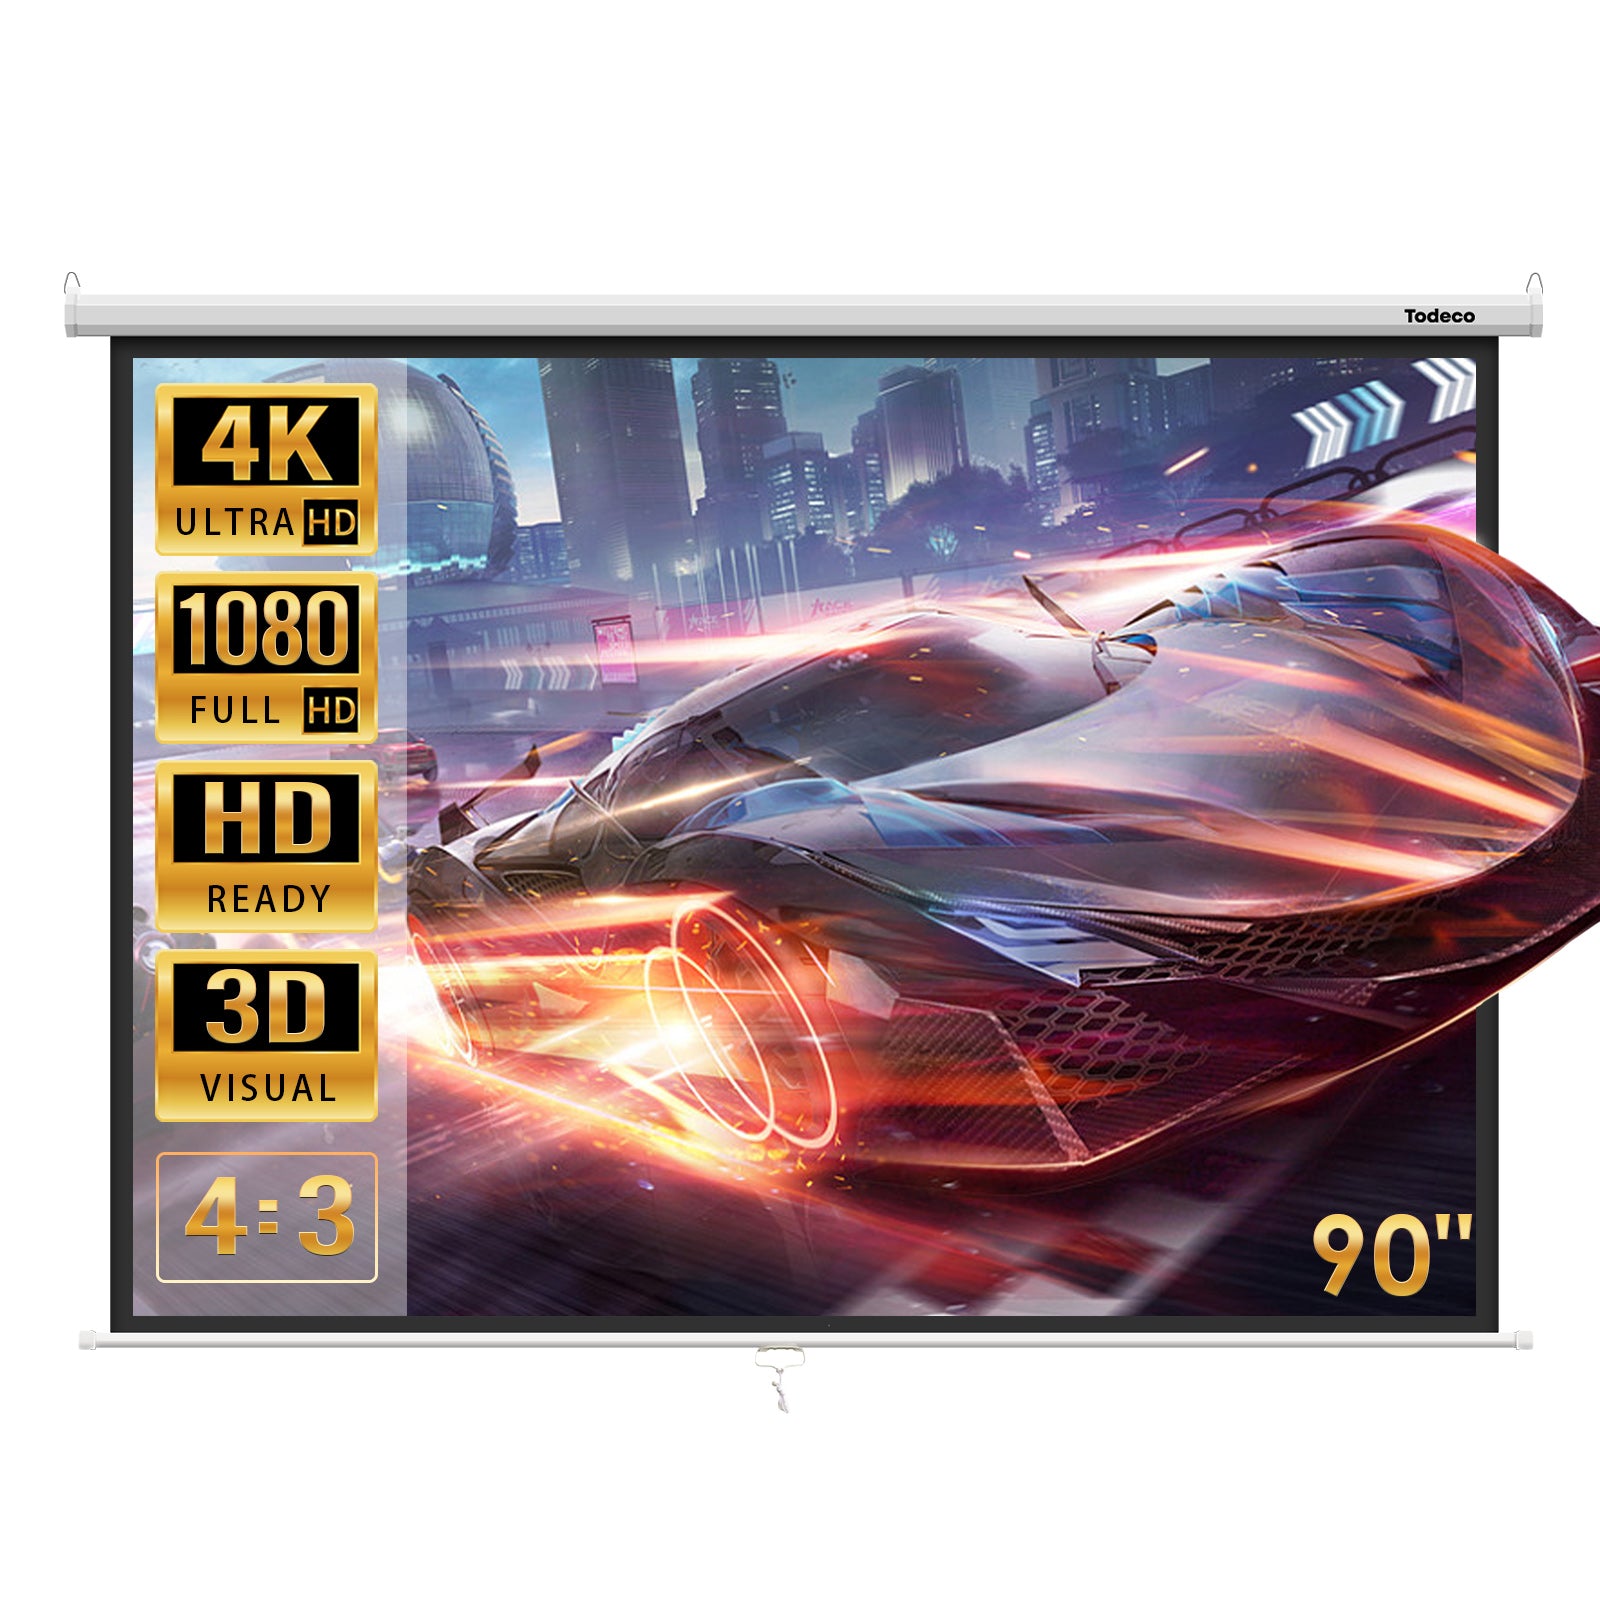 Todeco-90-Inch-Projection-Screen-Manual-Roll-Up-Wall-or-Ceiling-Mounting-for-Home-Cinema-and-Business-137-x-183-cm-4-3-Formats-HD-4K-3D-90-Inch-Projection-Screen-137-x-183-cm